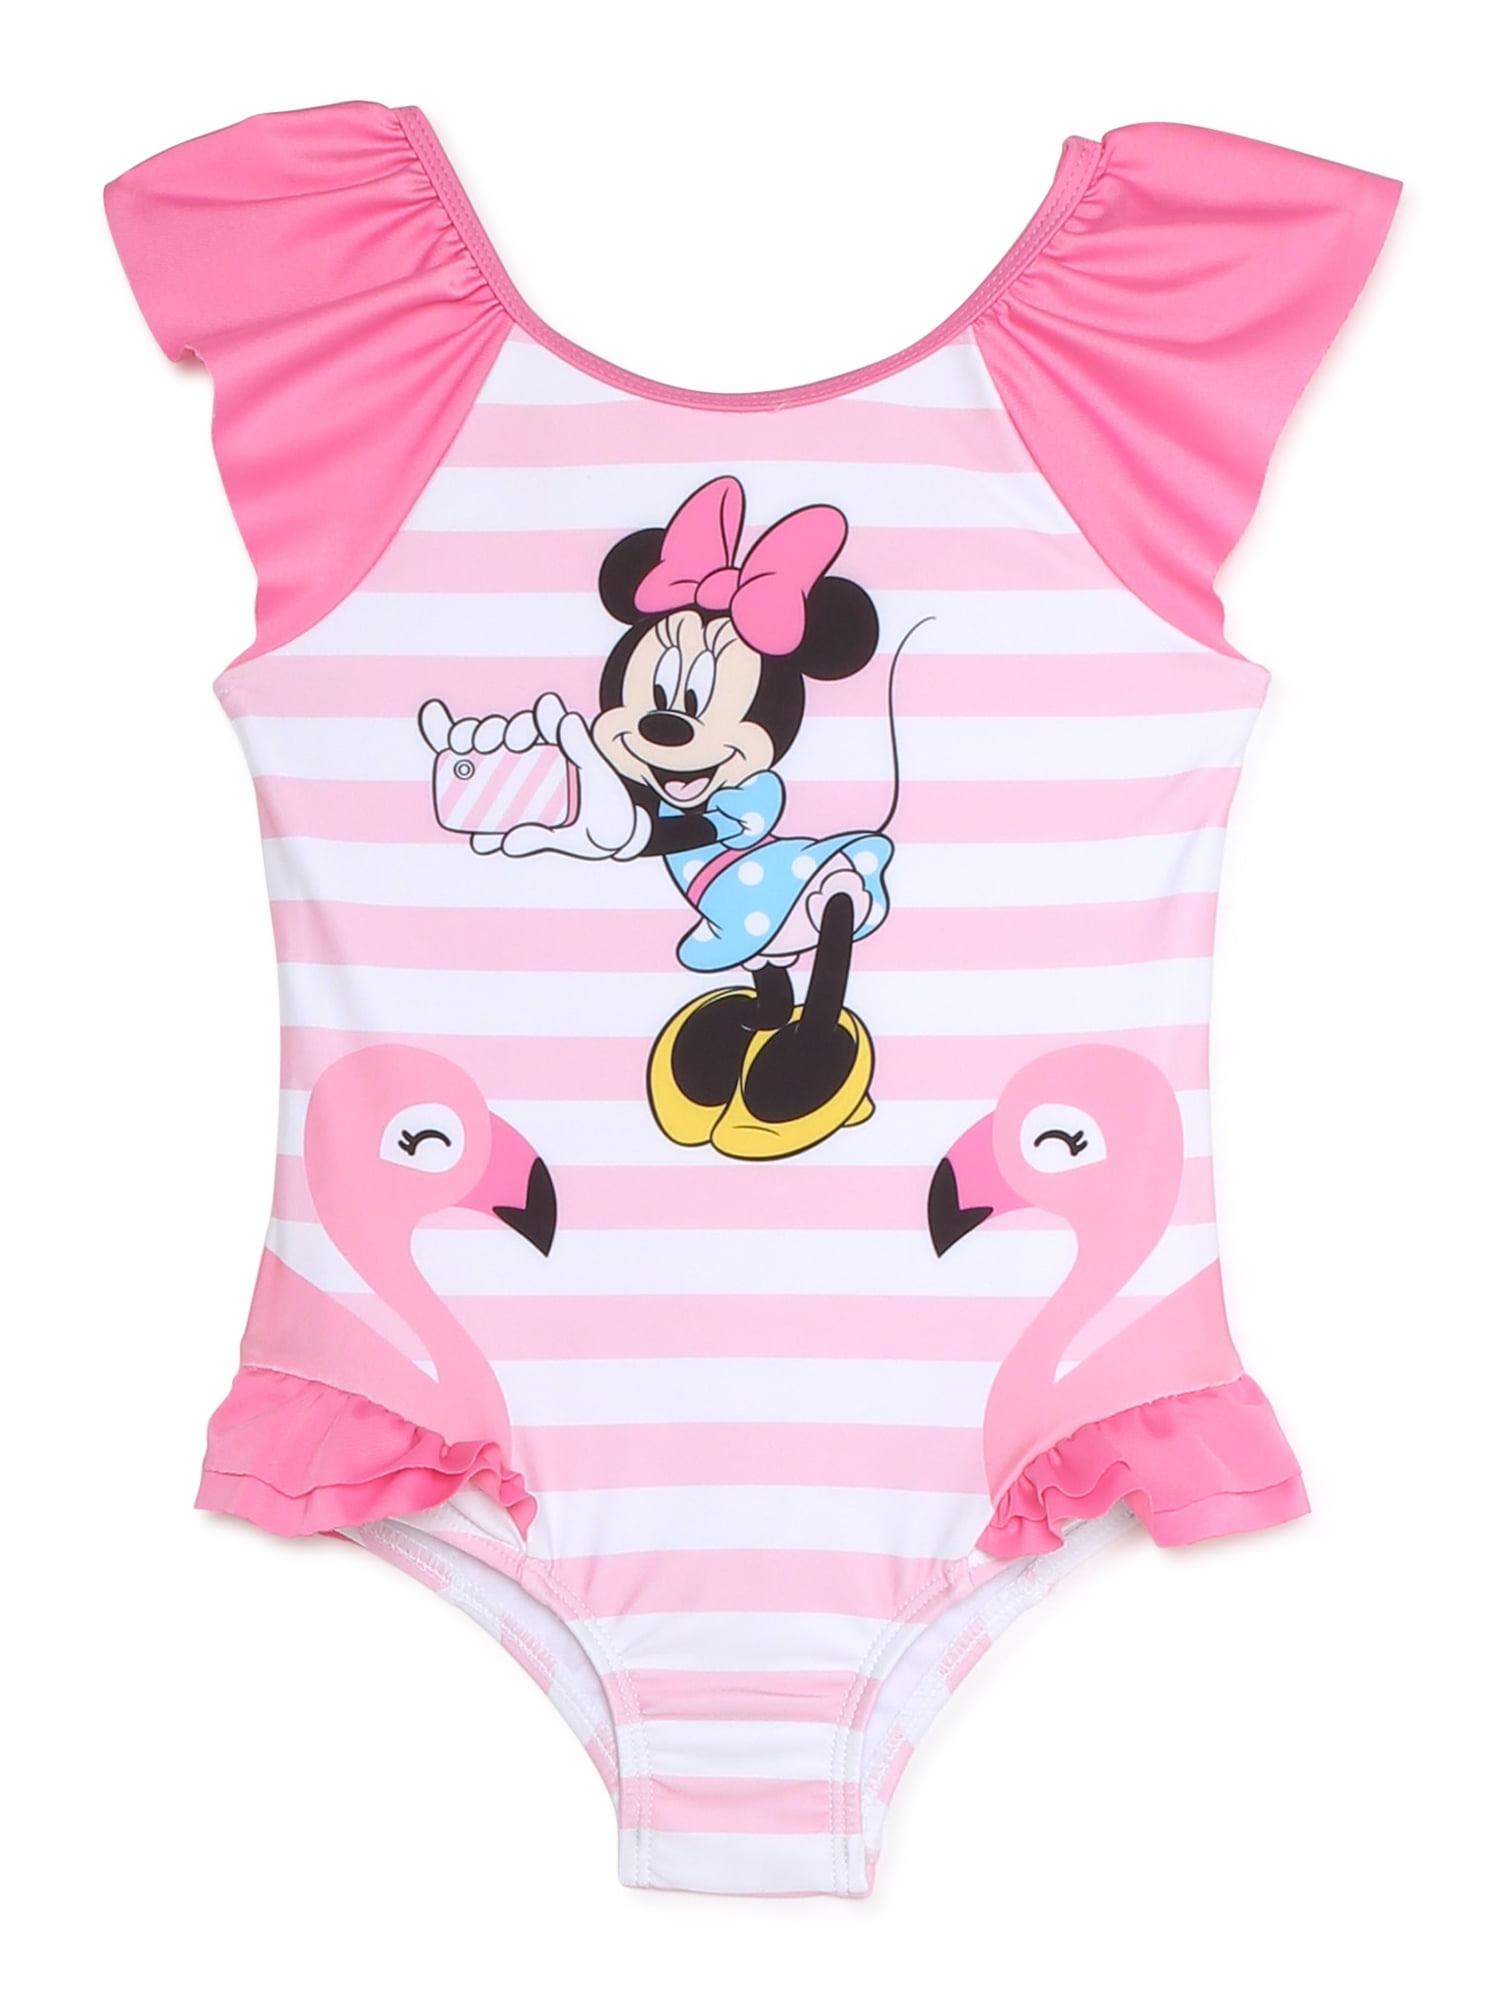 NEW Disney Minnie Mouse Toddler Girls Blue Red White One Piece Swimsuit Size 2T 